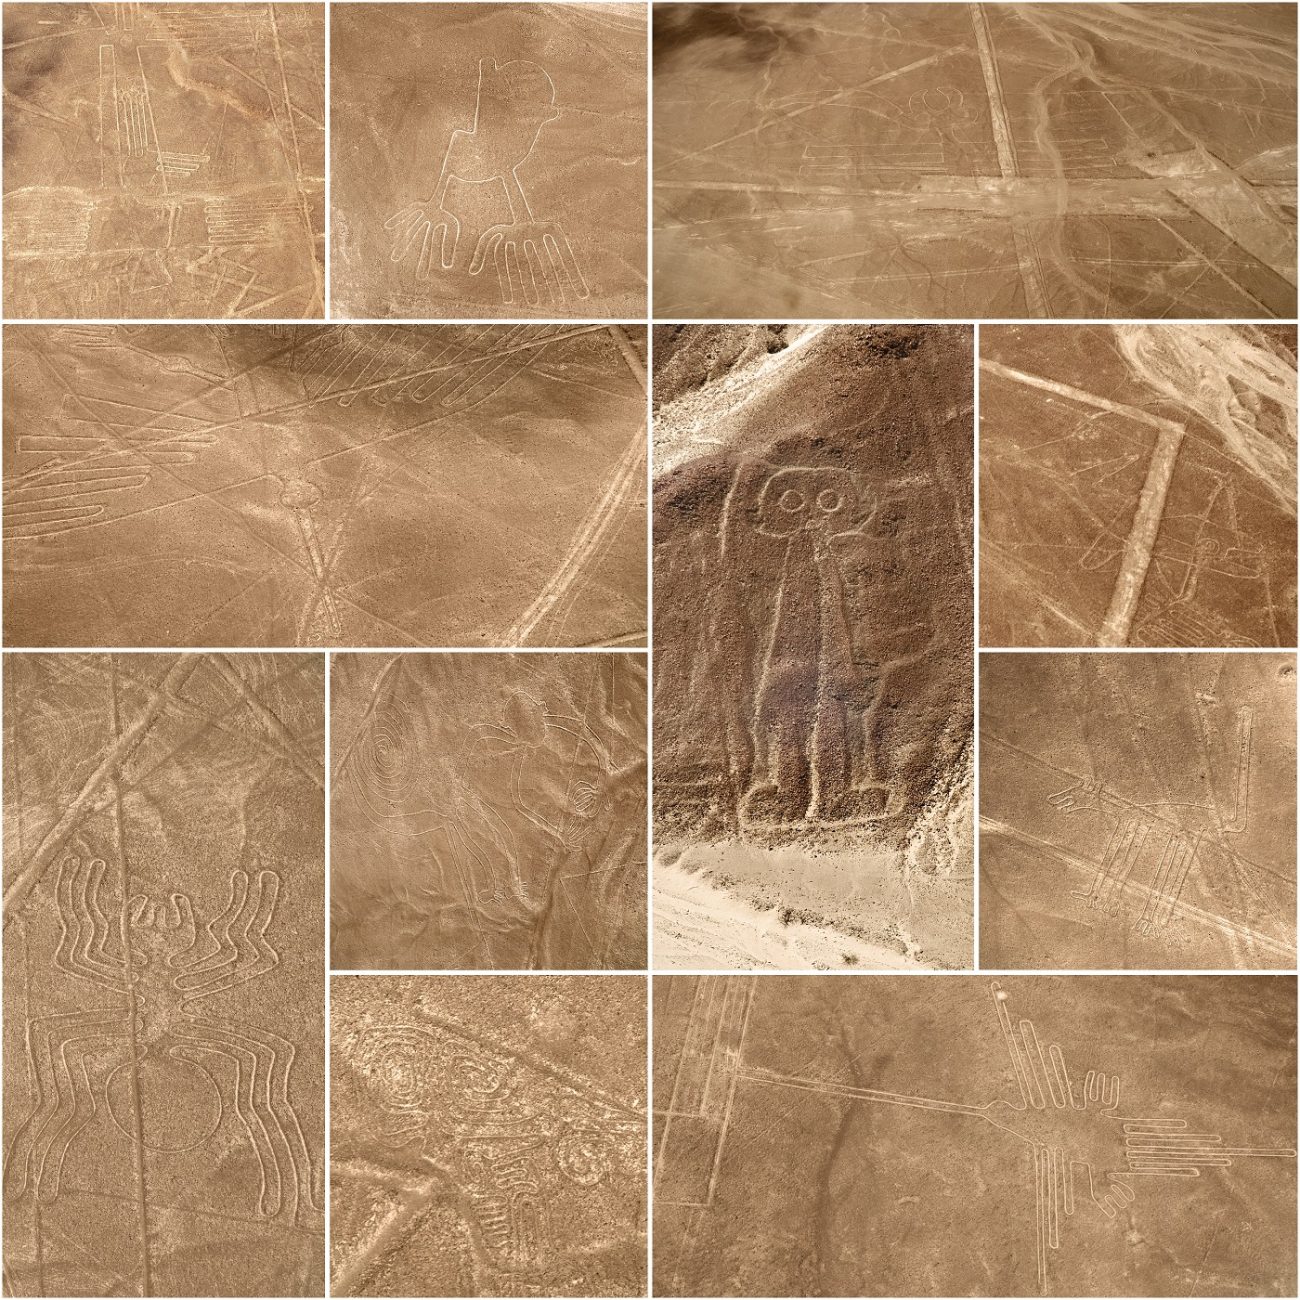 A collage of the Nazca lines. Image Credit: Shutterstock.